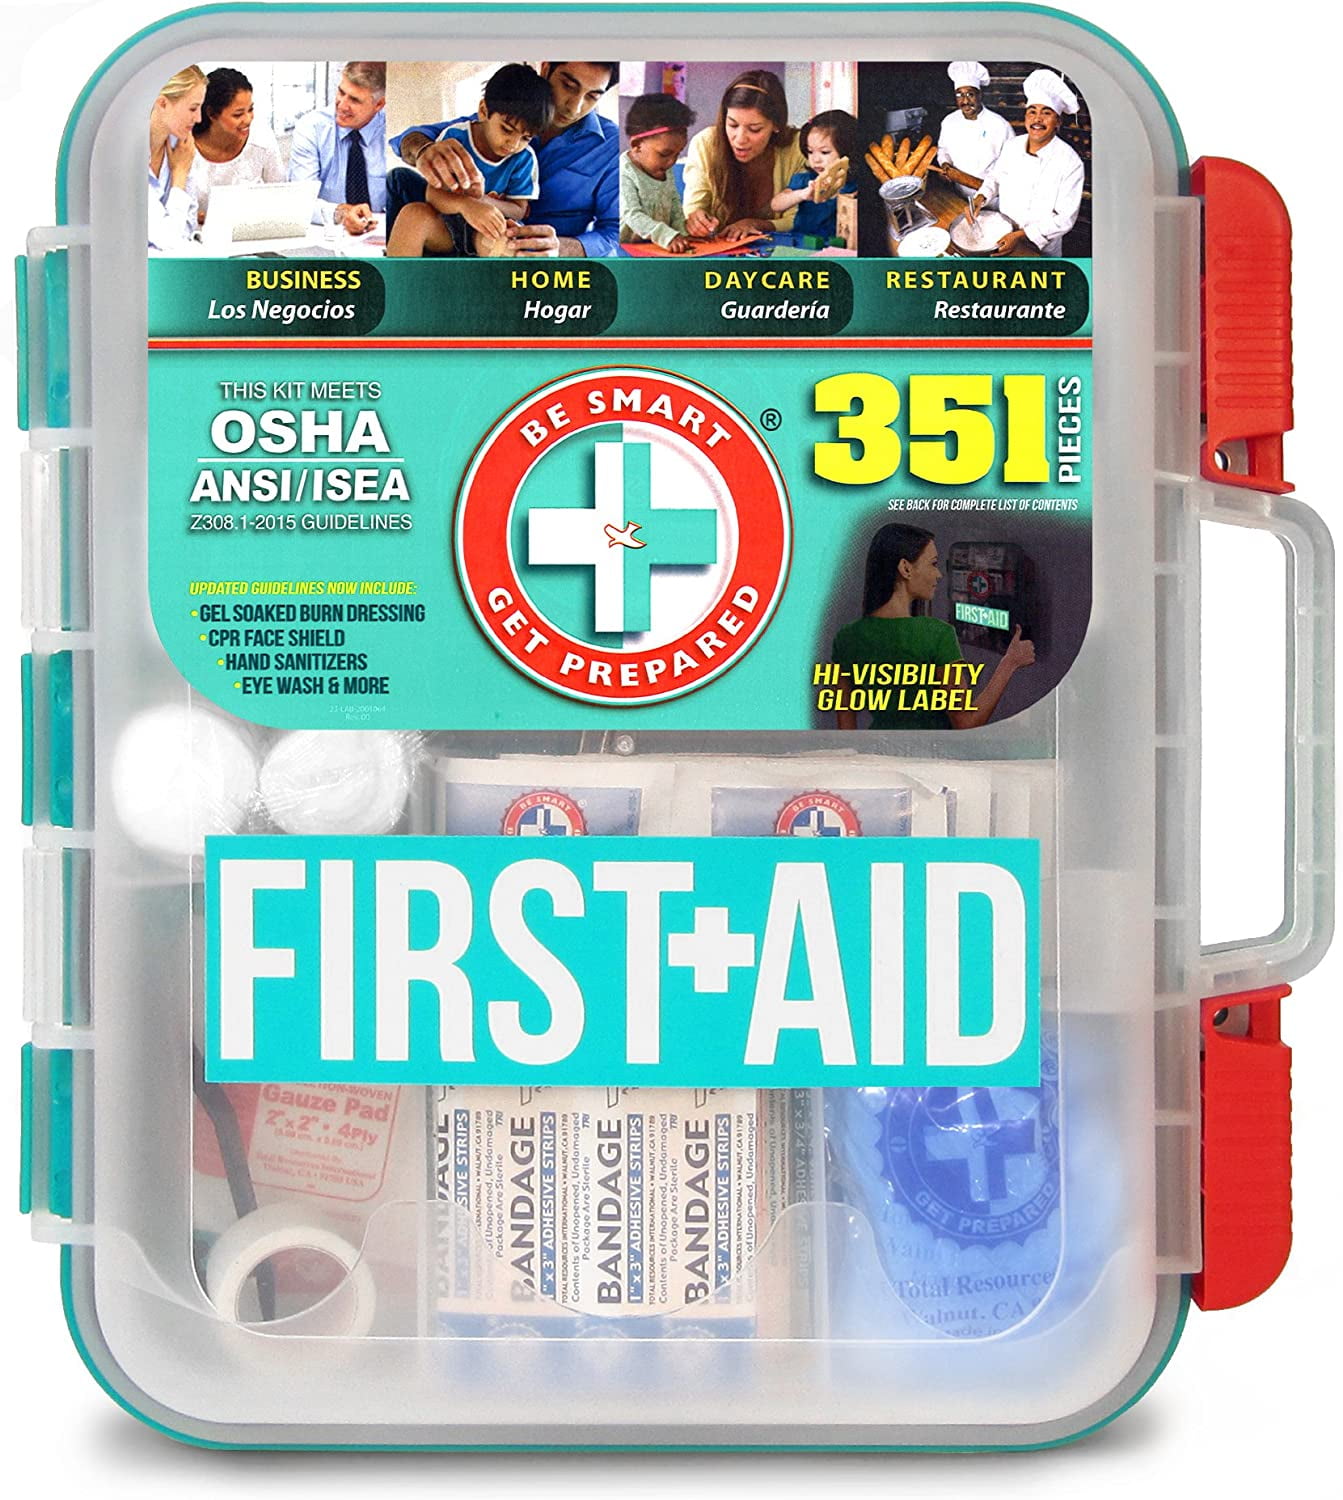 Be Smart Get Prepared 351 Piece First Aid Kit Exceeds OSHA ANSI